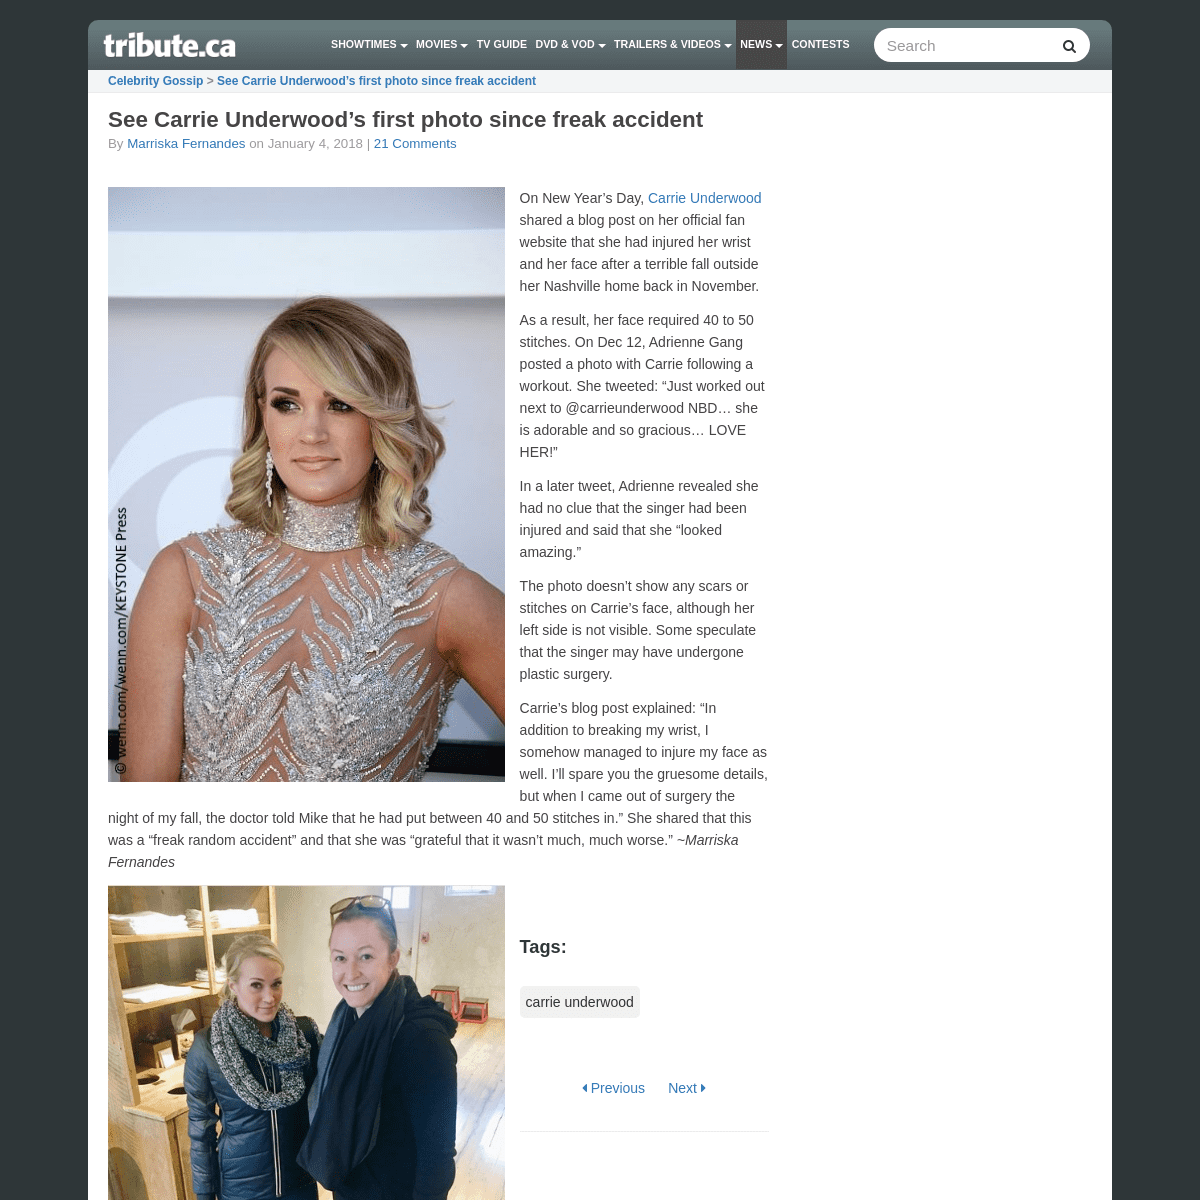 A complete backup of https://www.tribute.ca/news/carrie-underwood-pictured-for-first-time-since-freak-accident/2018/01/04/